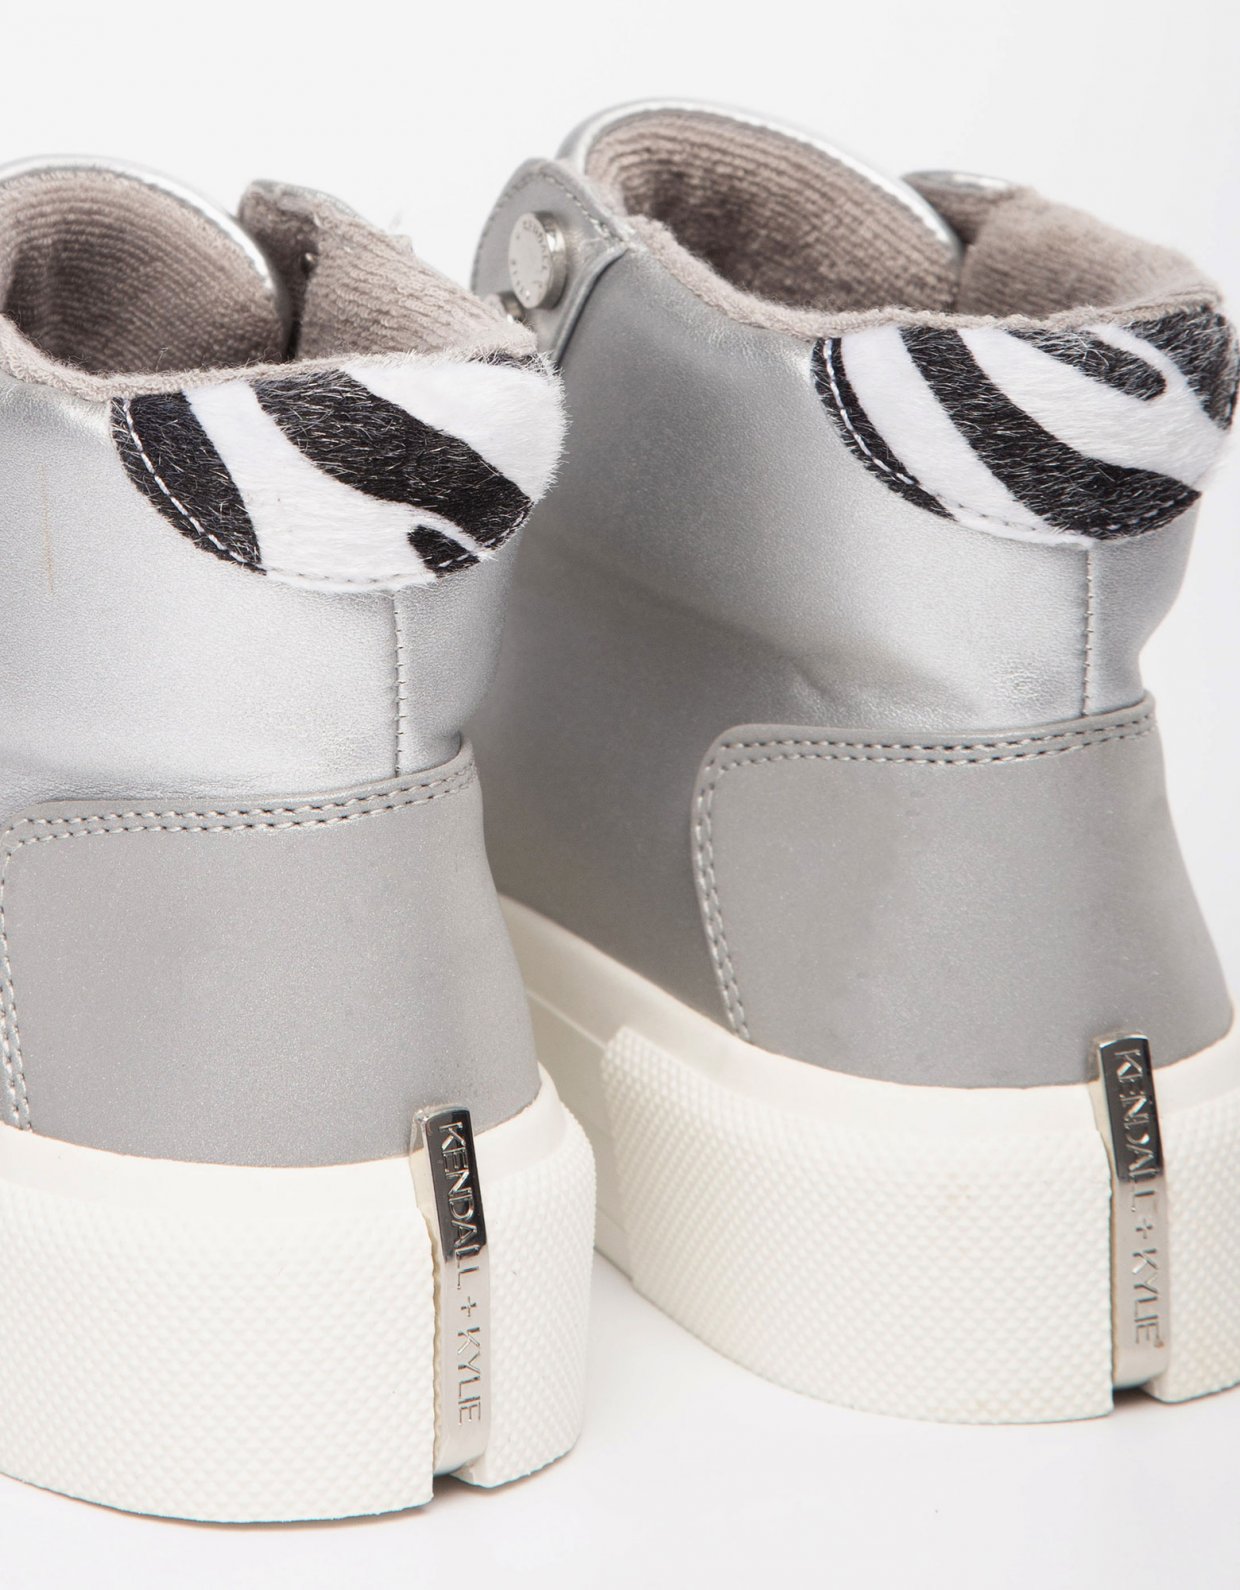 Kendall + Kylie Tetra sneakers silver